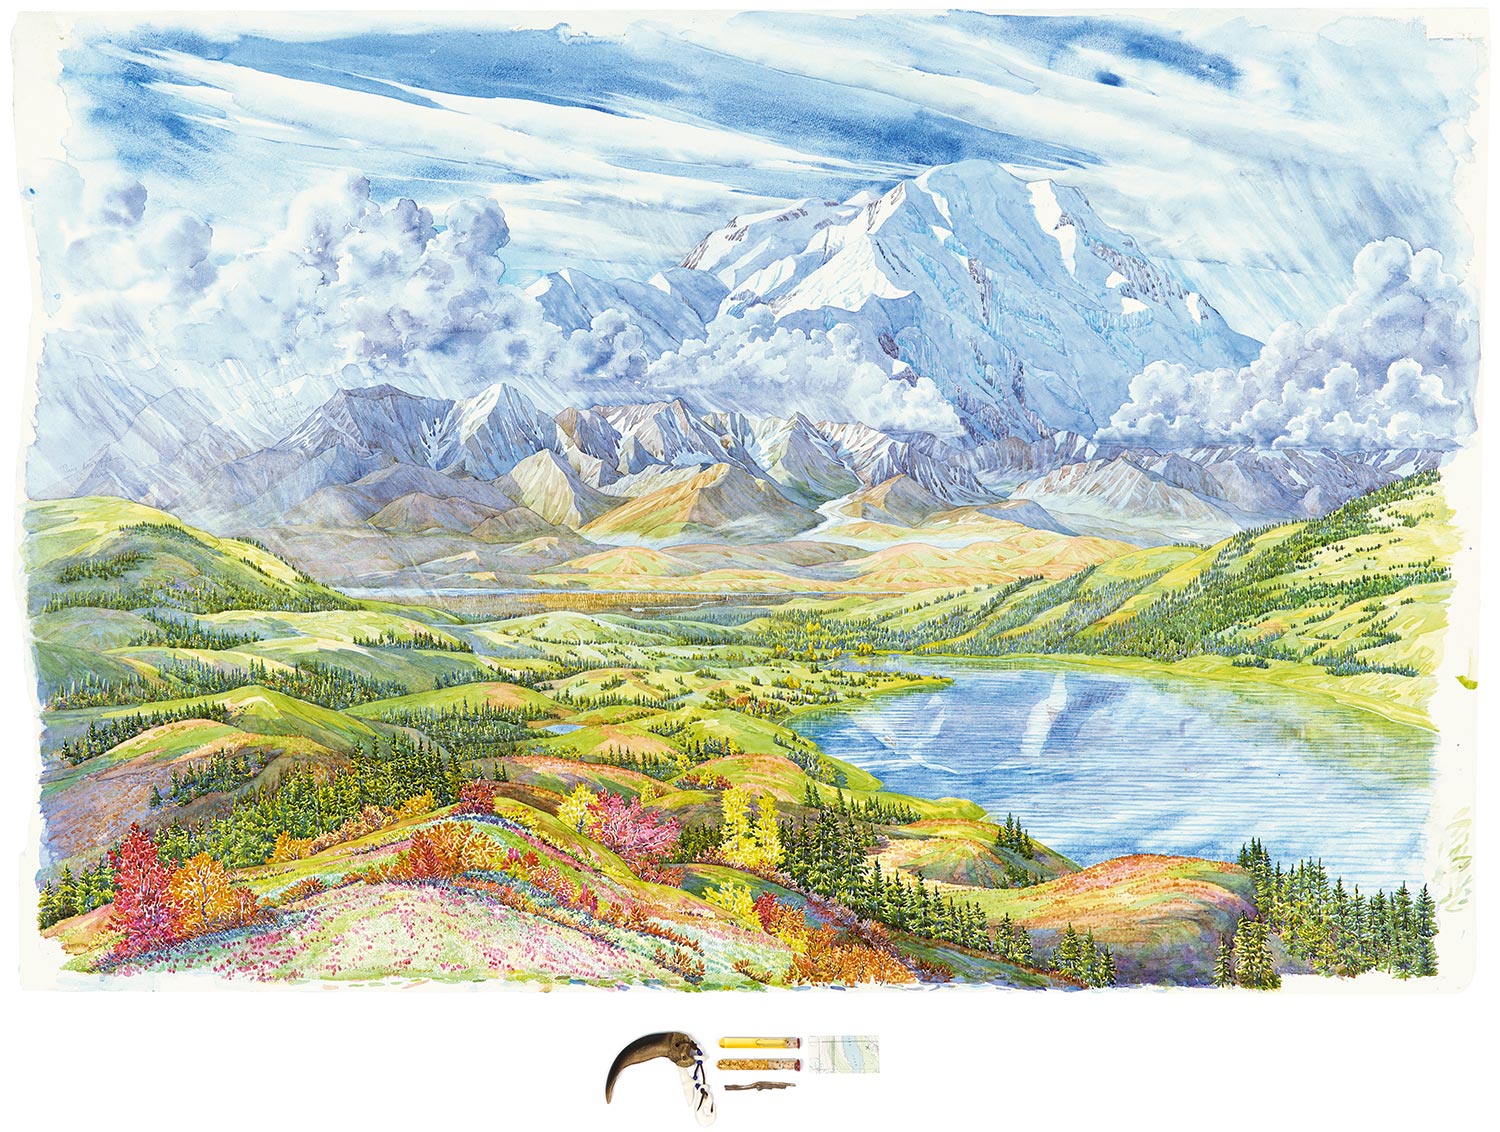  Tony Foster,  Denali and Wonder Lake Looking South from Ansel Adams Point , 2014. Watercolor and graphite on paper, acrylic, bone, leather, glass beads, glass tubes, oil, gold, cork, wax, wood, map. 36 x 54 in. | 3 1/2 x 10 in. Photo by Trevor Burro